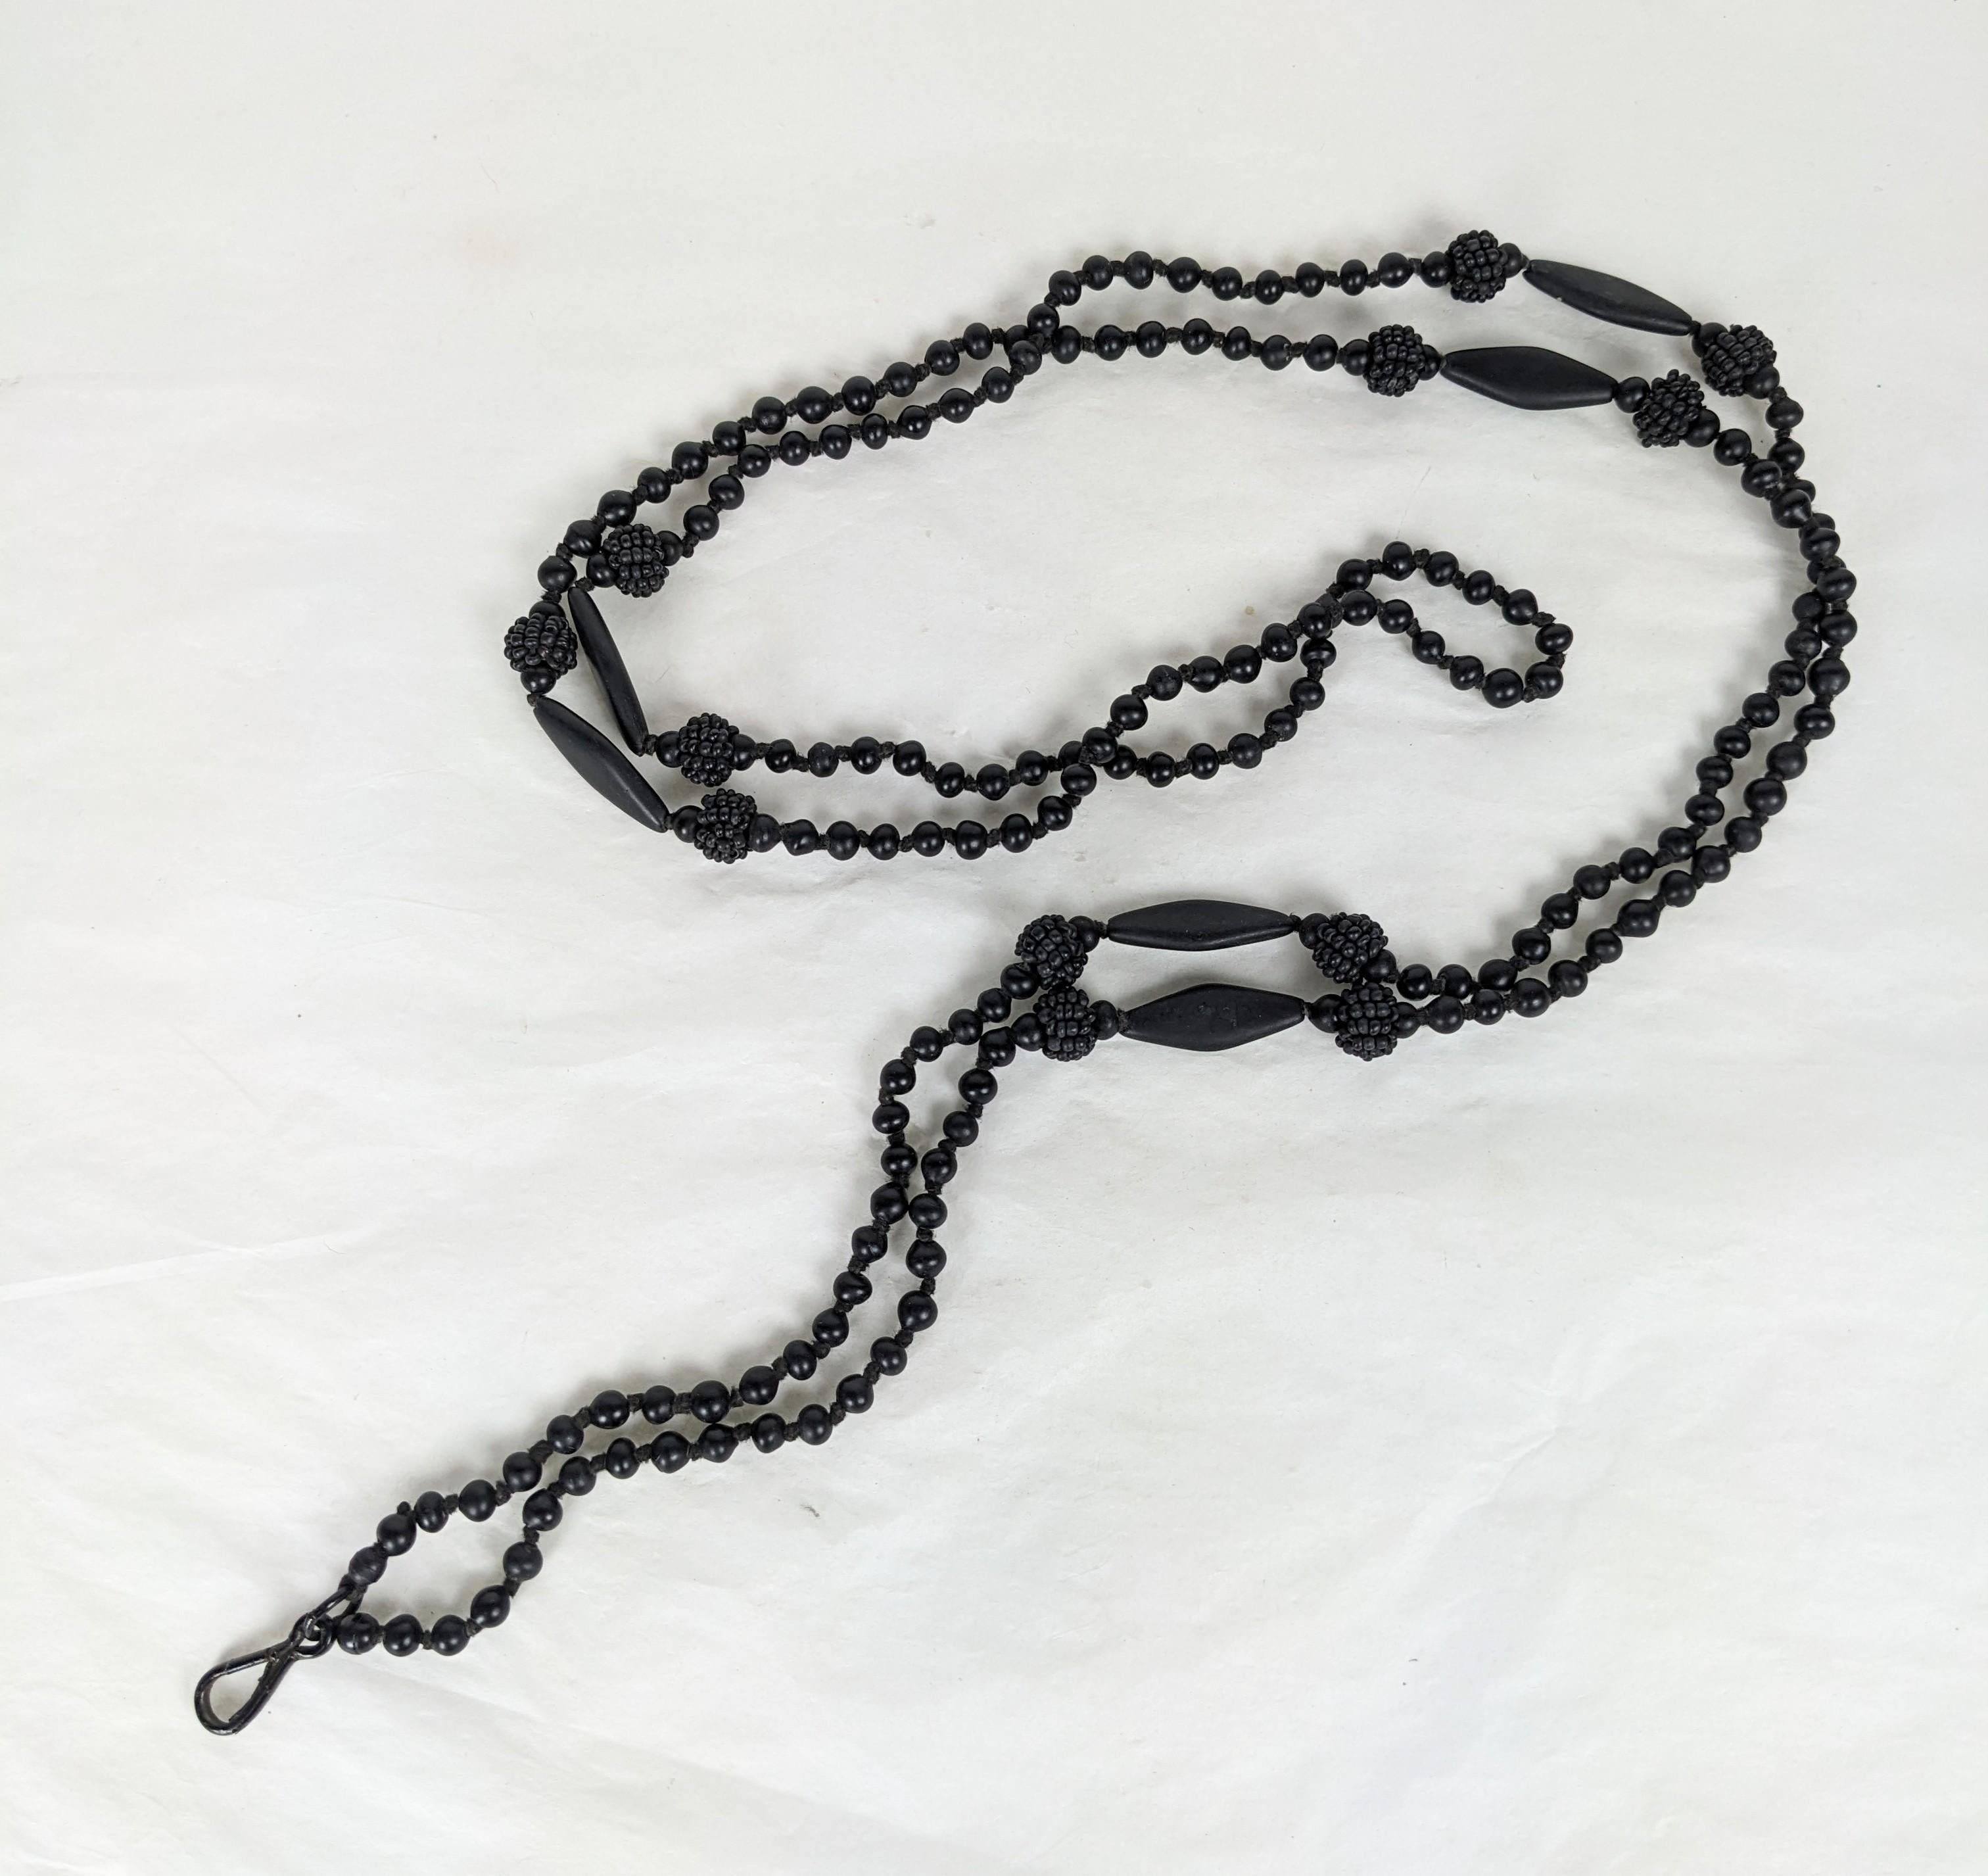 Victorian matt black Whitby Jet lorgnette bead necklace. Composed of small round hand knotted beads, six large elongated kite shape beads flanked by round beads of woven matt Whitby jet seed beads. With black enameled hook clasp. 1890's. 
Very Good